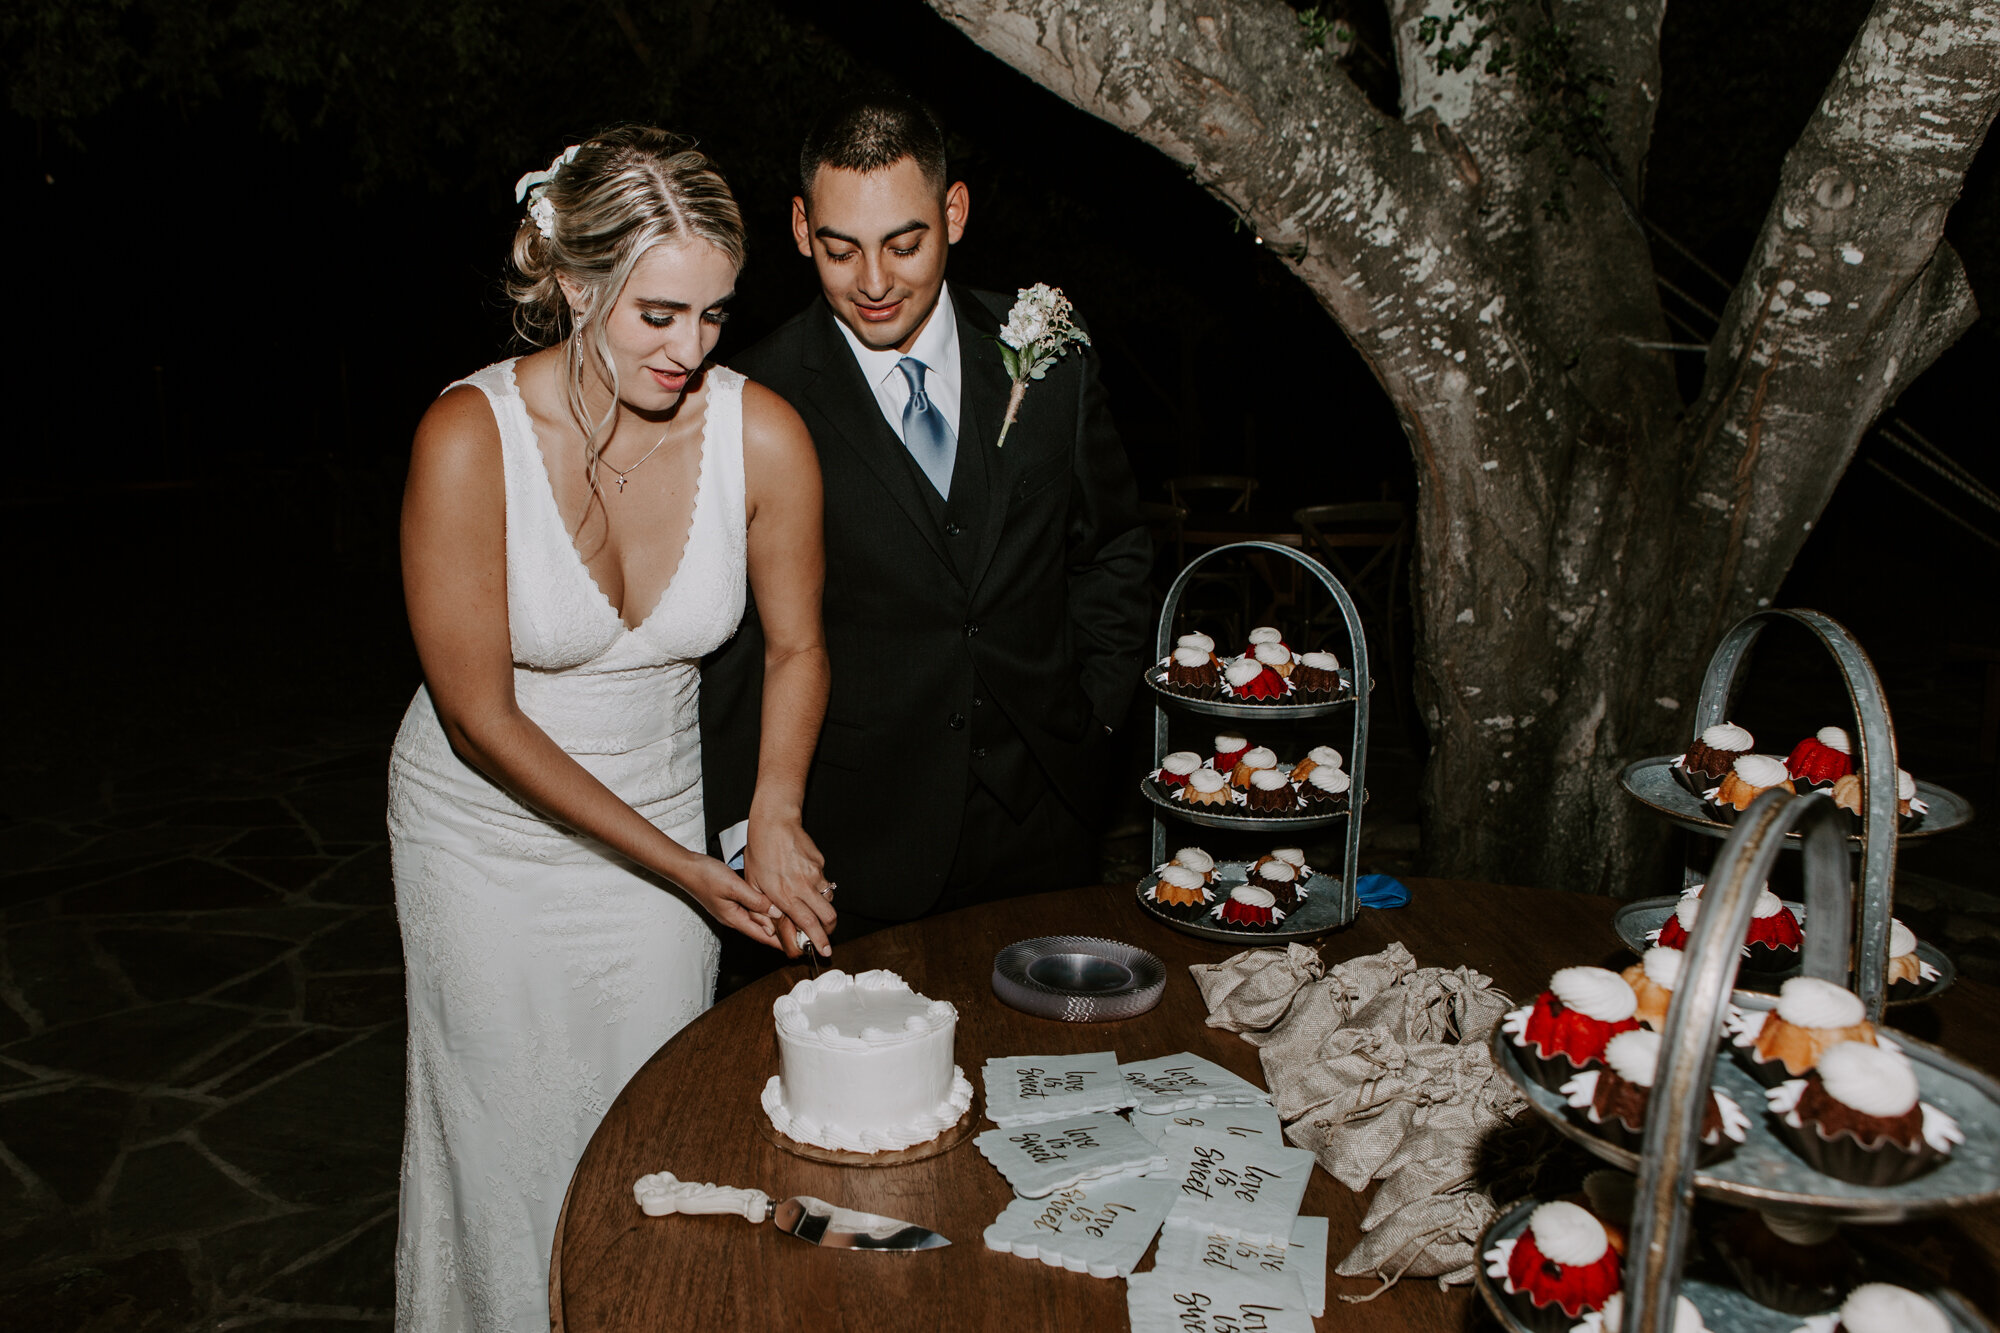 Bride and groom cake cutting. Radiant Bohemian Hill Country Wedding at Gruene Estate in New Braunfels, TX